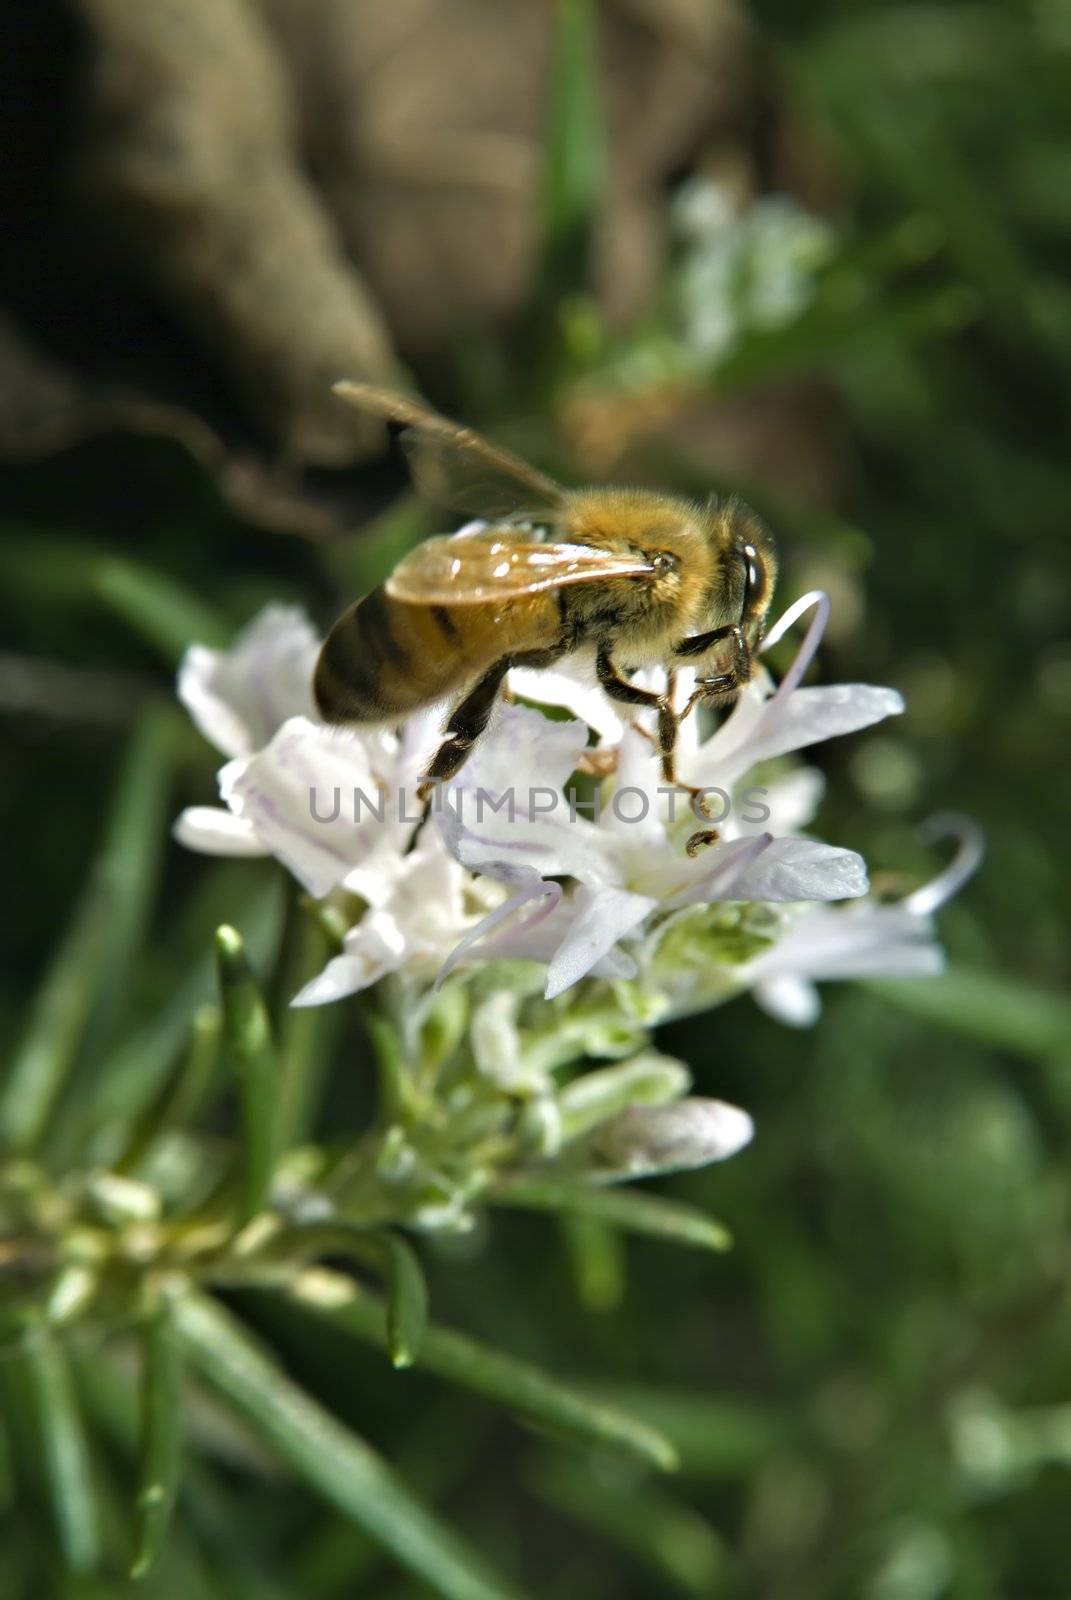 clos-up of a Bee on Rosemary flower